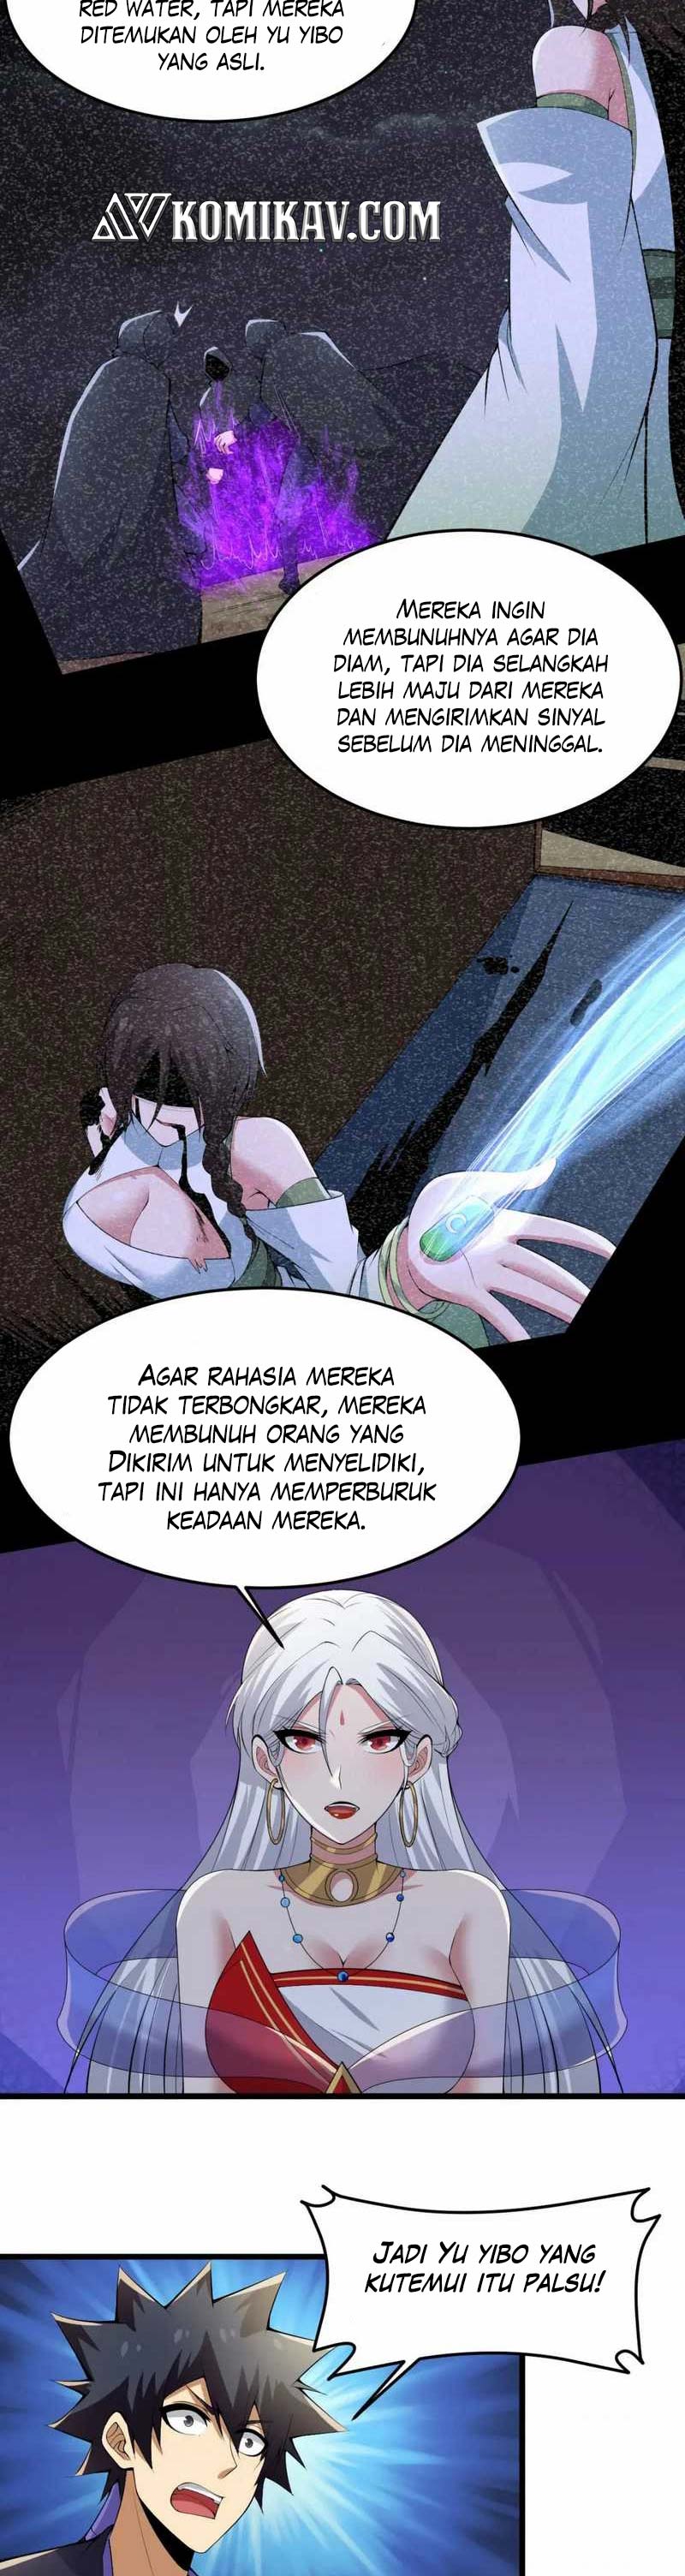 Dilarang COPAS - situs resmi www.mangacanblog.com - Komik i just want to be beaten to death by everyone 138 - chapter 138 139 Indonesia i just want to be beaten to death by everyone 138 - chapter 138 Terbaru 6|Baca Manga Komik Indonesia|Mangacan